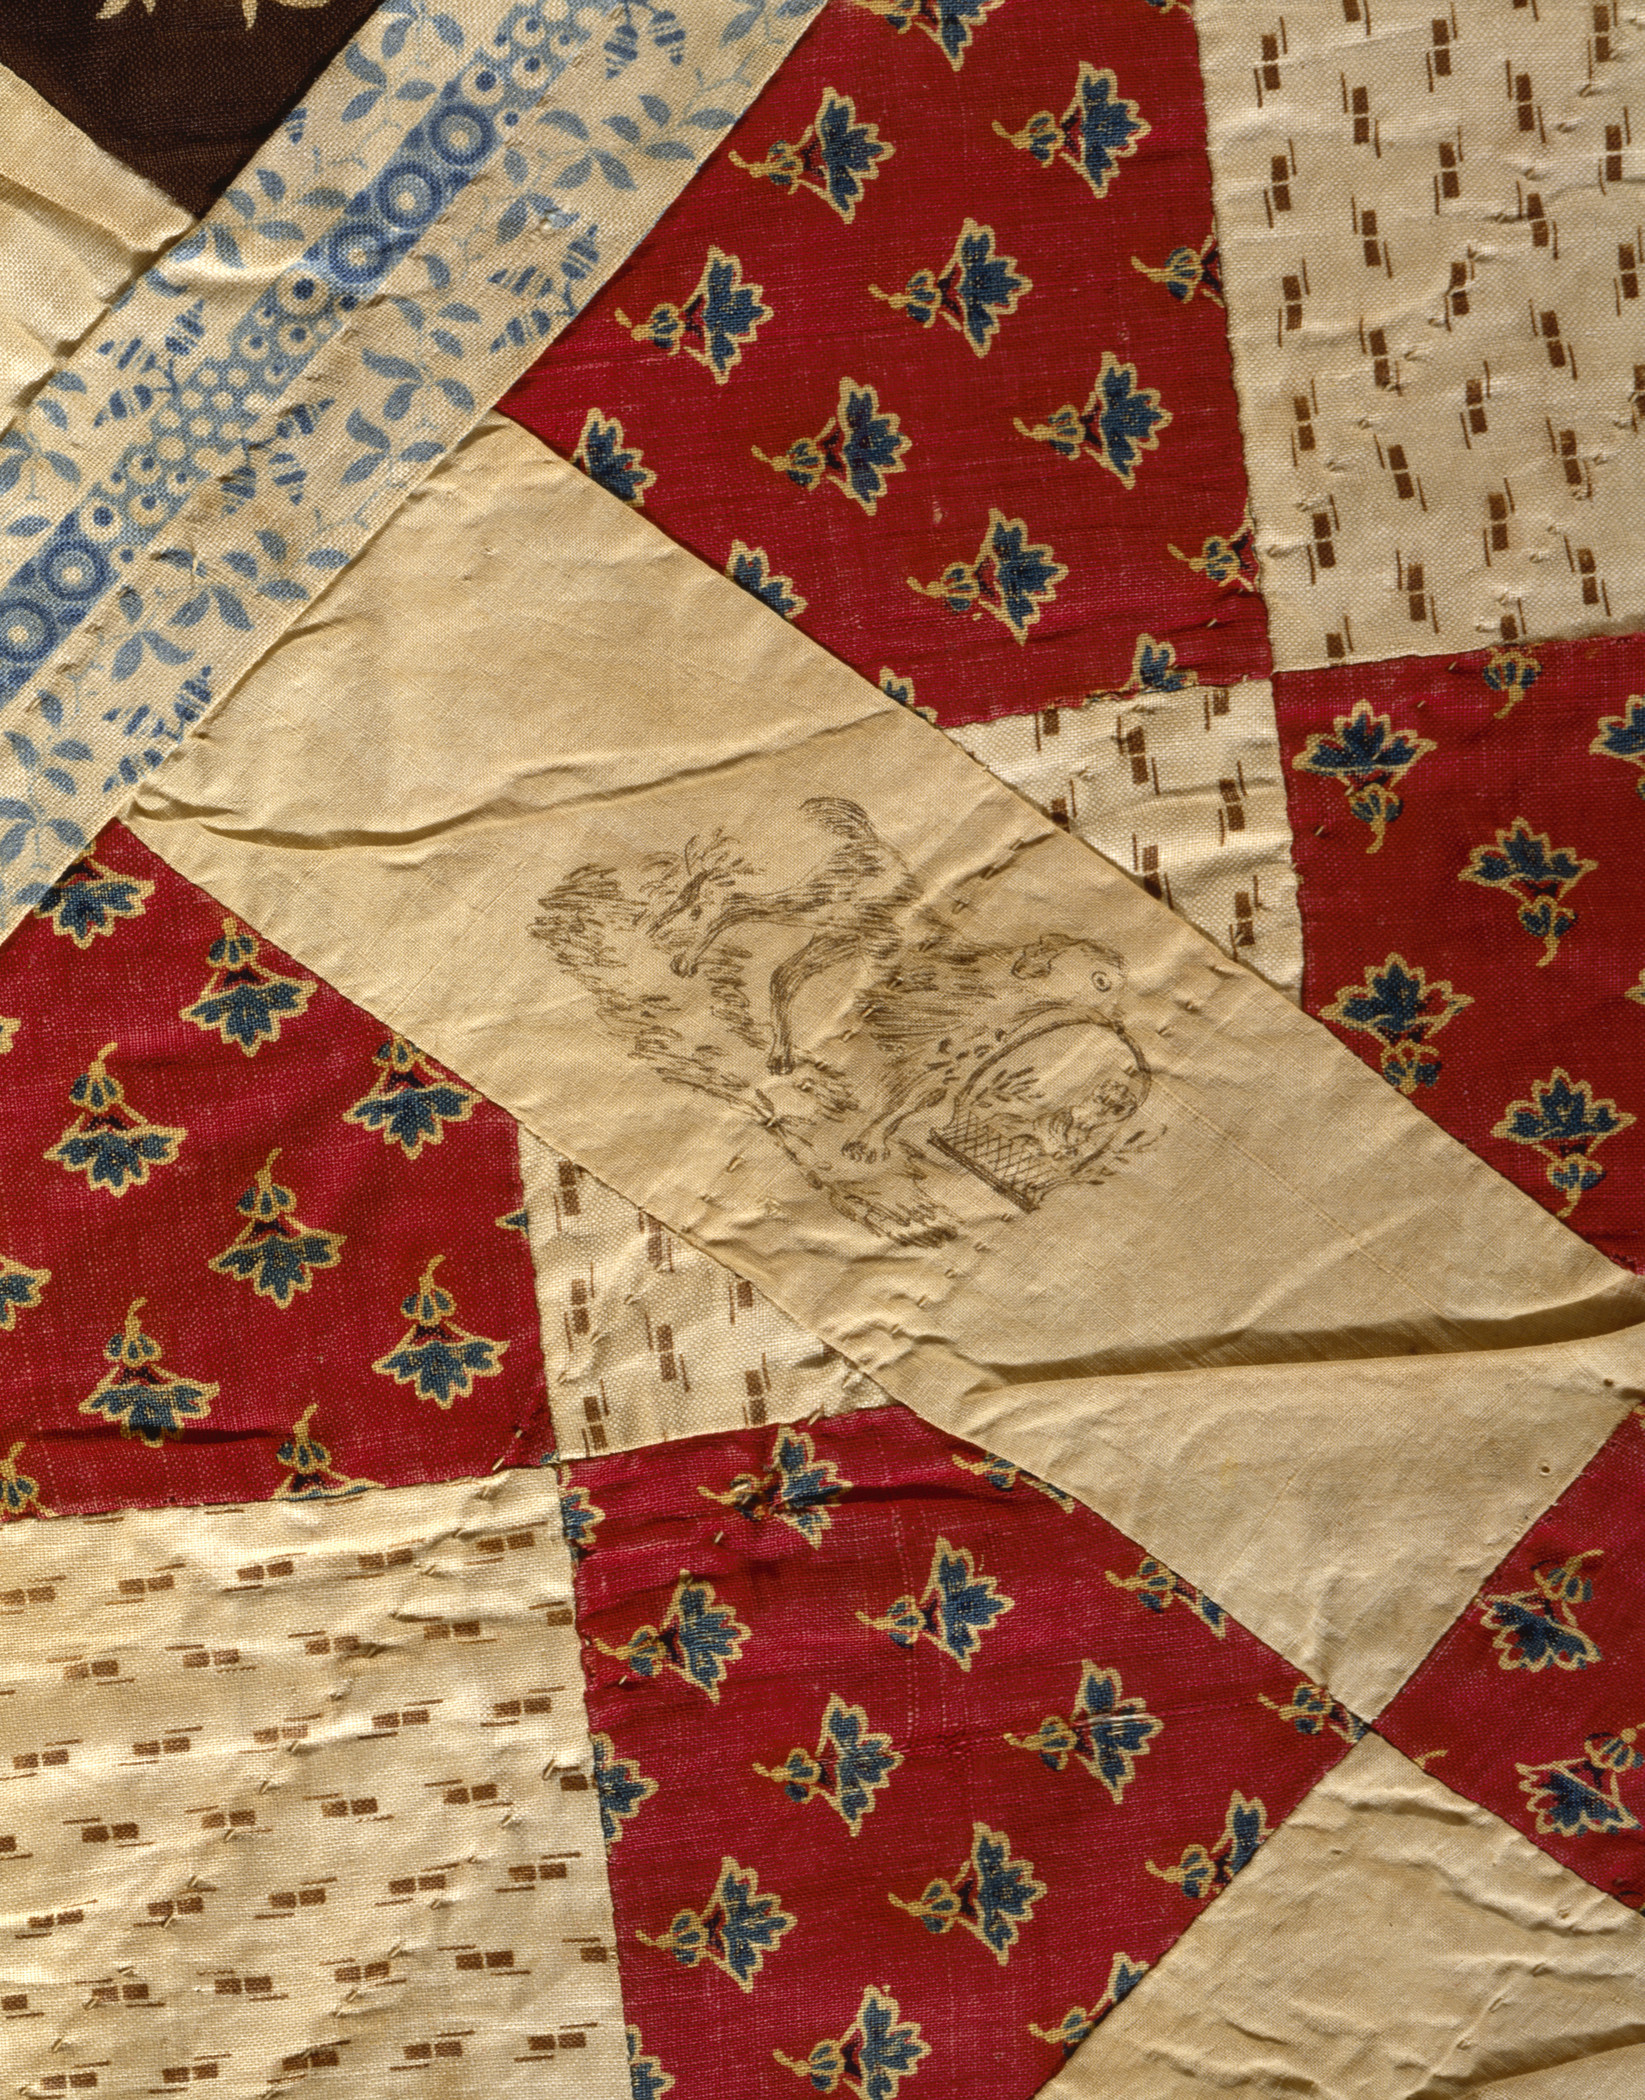 Mary P. Allen, Memorial Quilt, 1841–47, Los Angeles County Museum of Art, gift of Mr. and Mrs. Laurence A. Ferris, photo © Museum Associates/LACMA